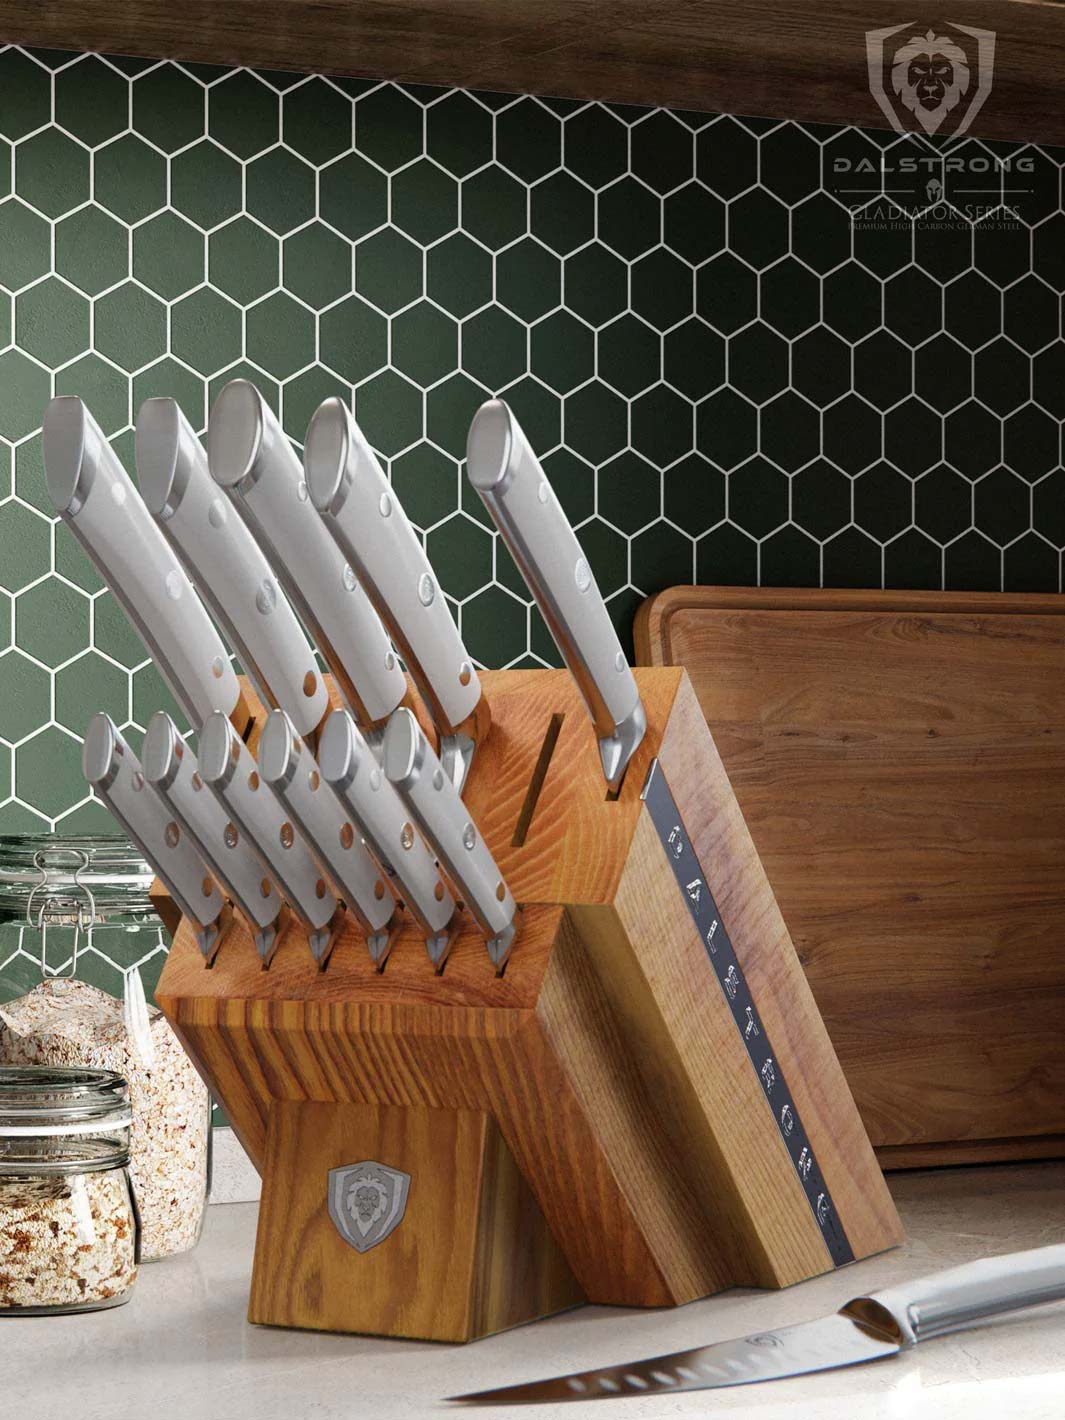 Kitchen Knife Block Sets from Dalstrong. Culinary made cool.